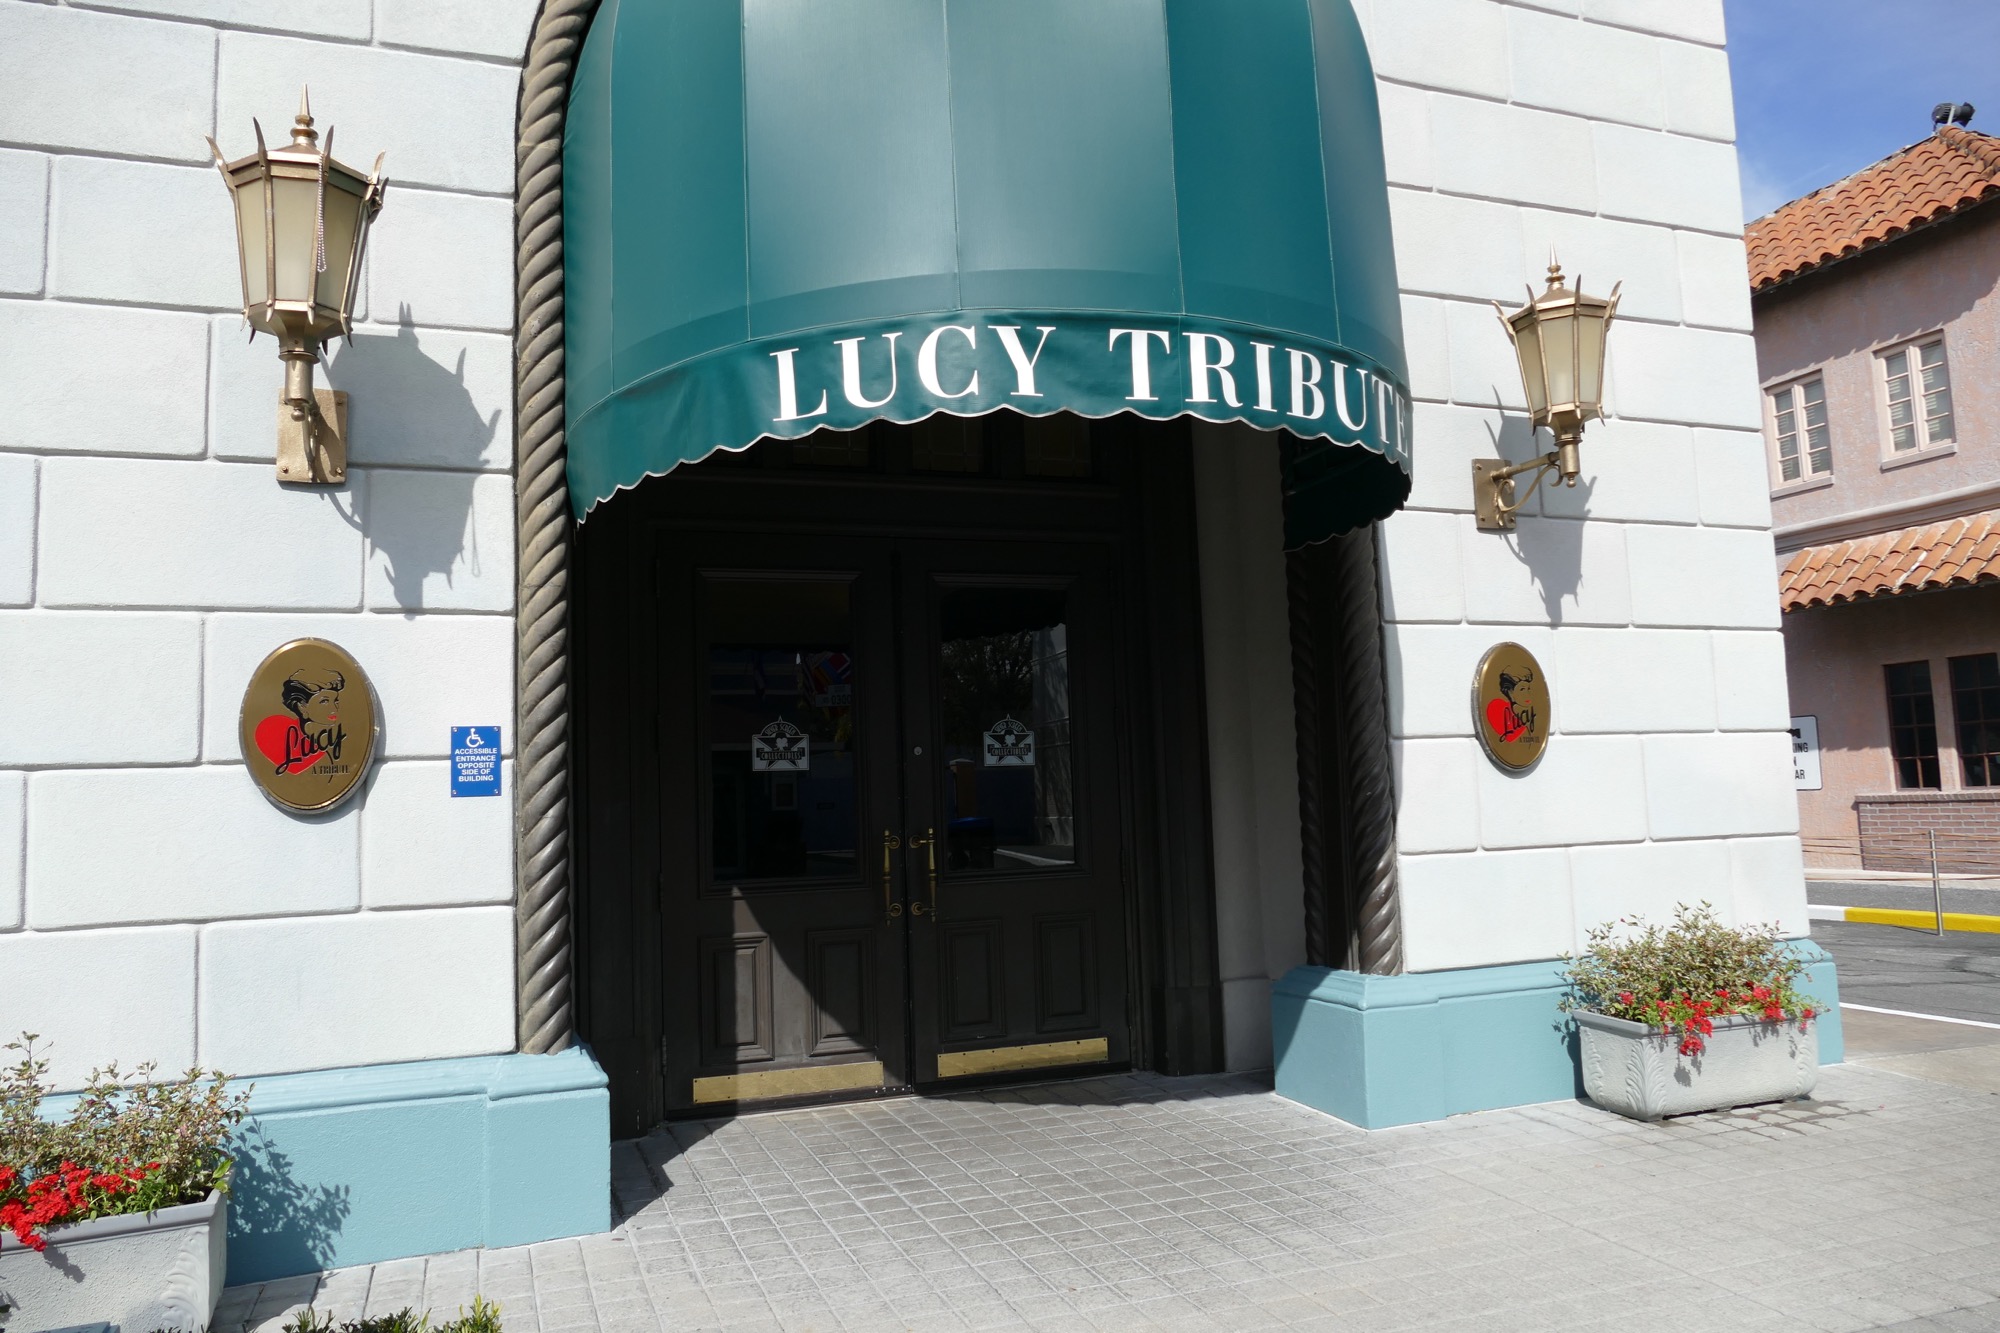 Lucy: A Tribute at Universal Studios Florida